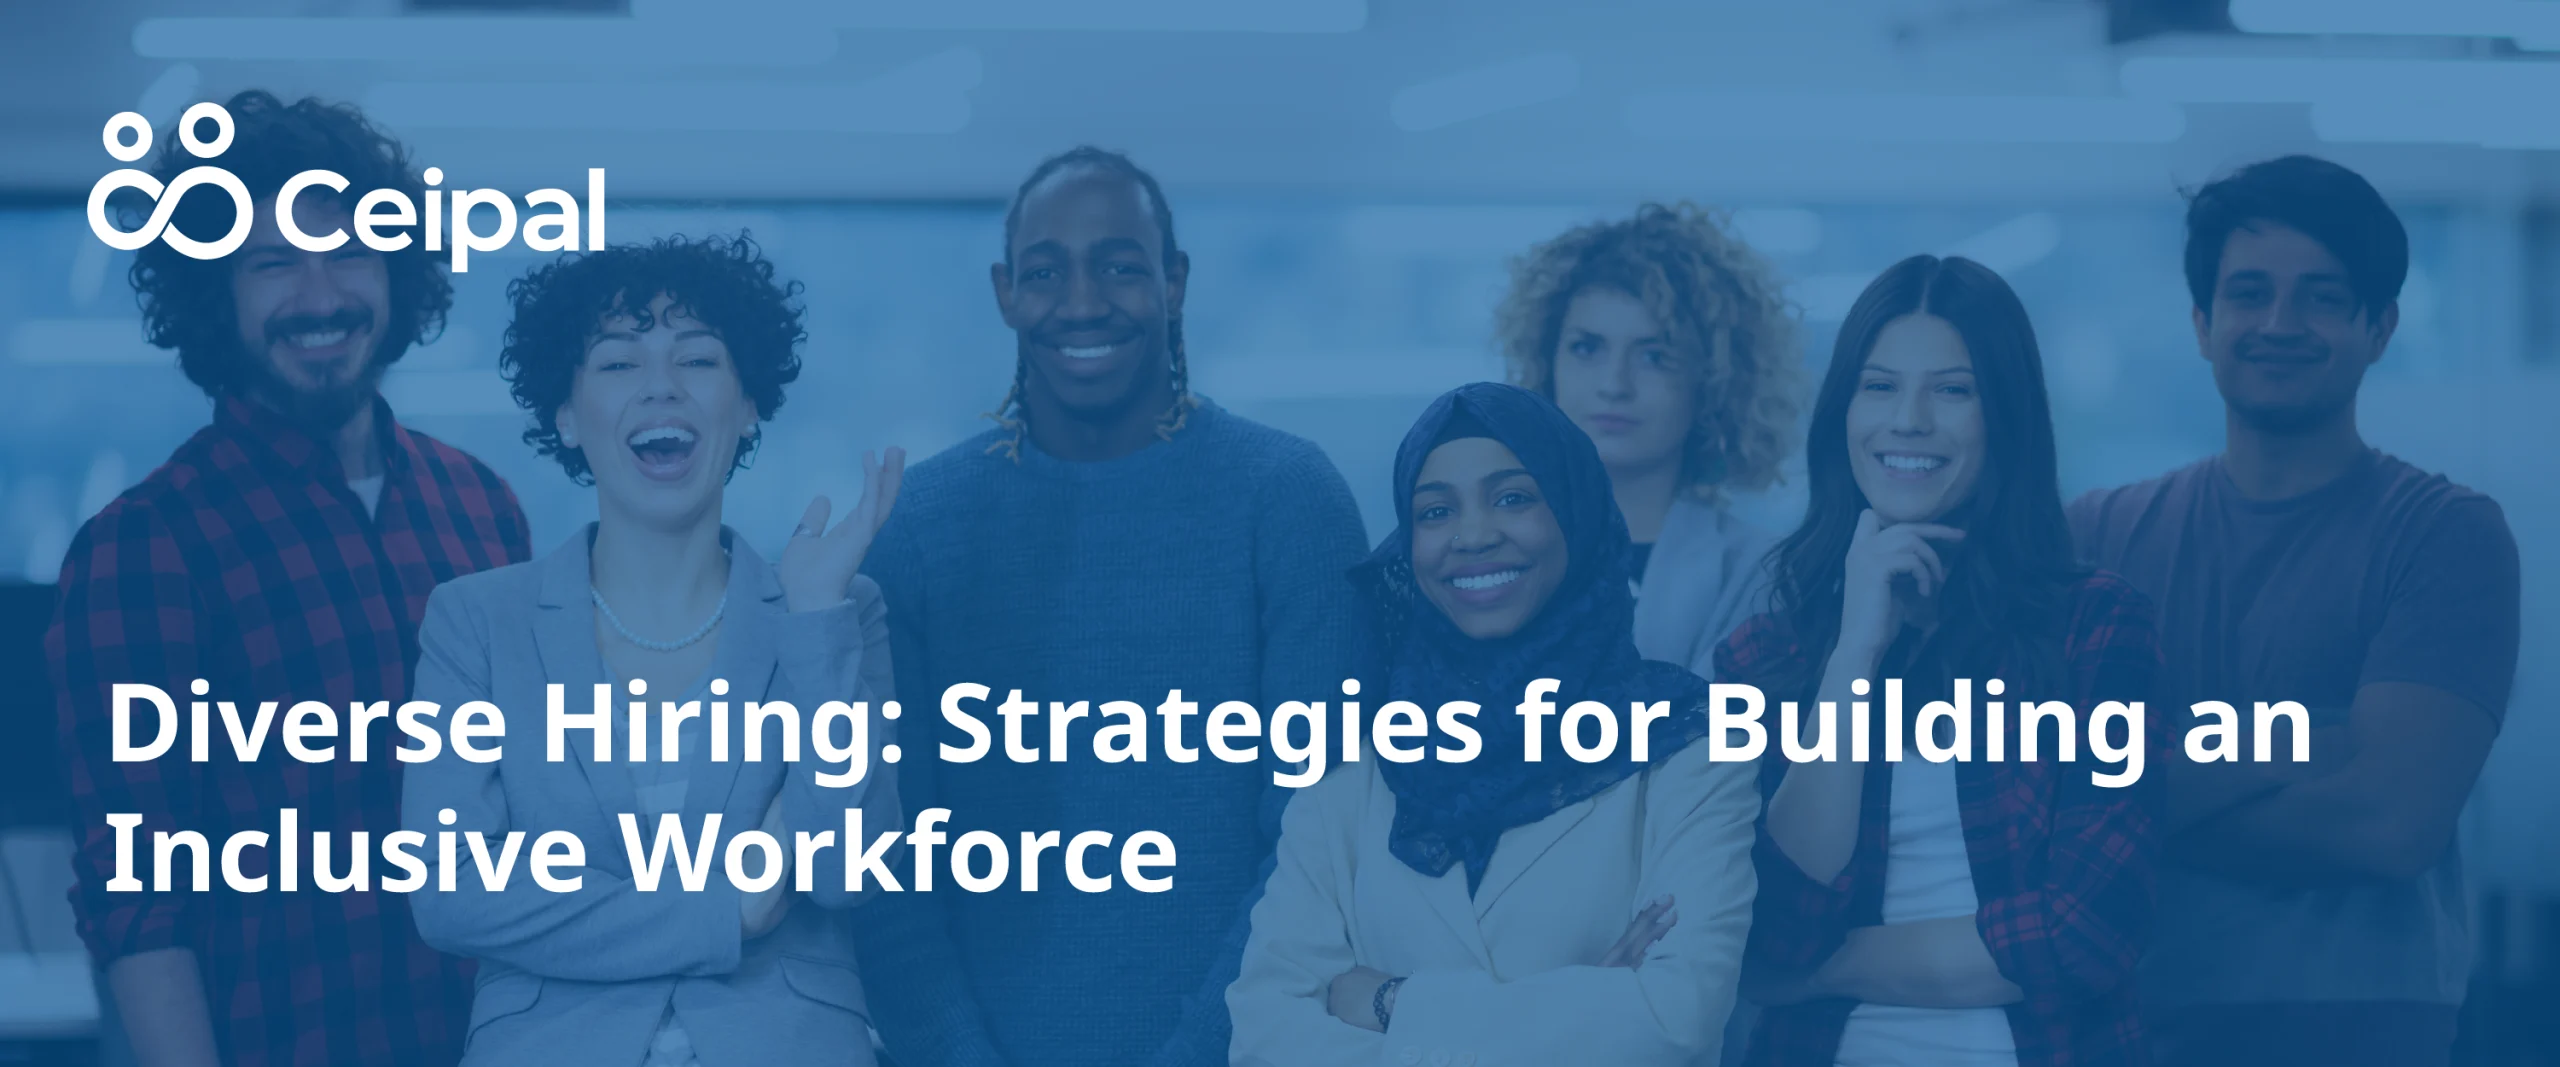 Diversity Hiring: Strategies for Building an Inclusive Workforce